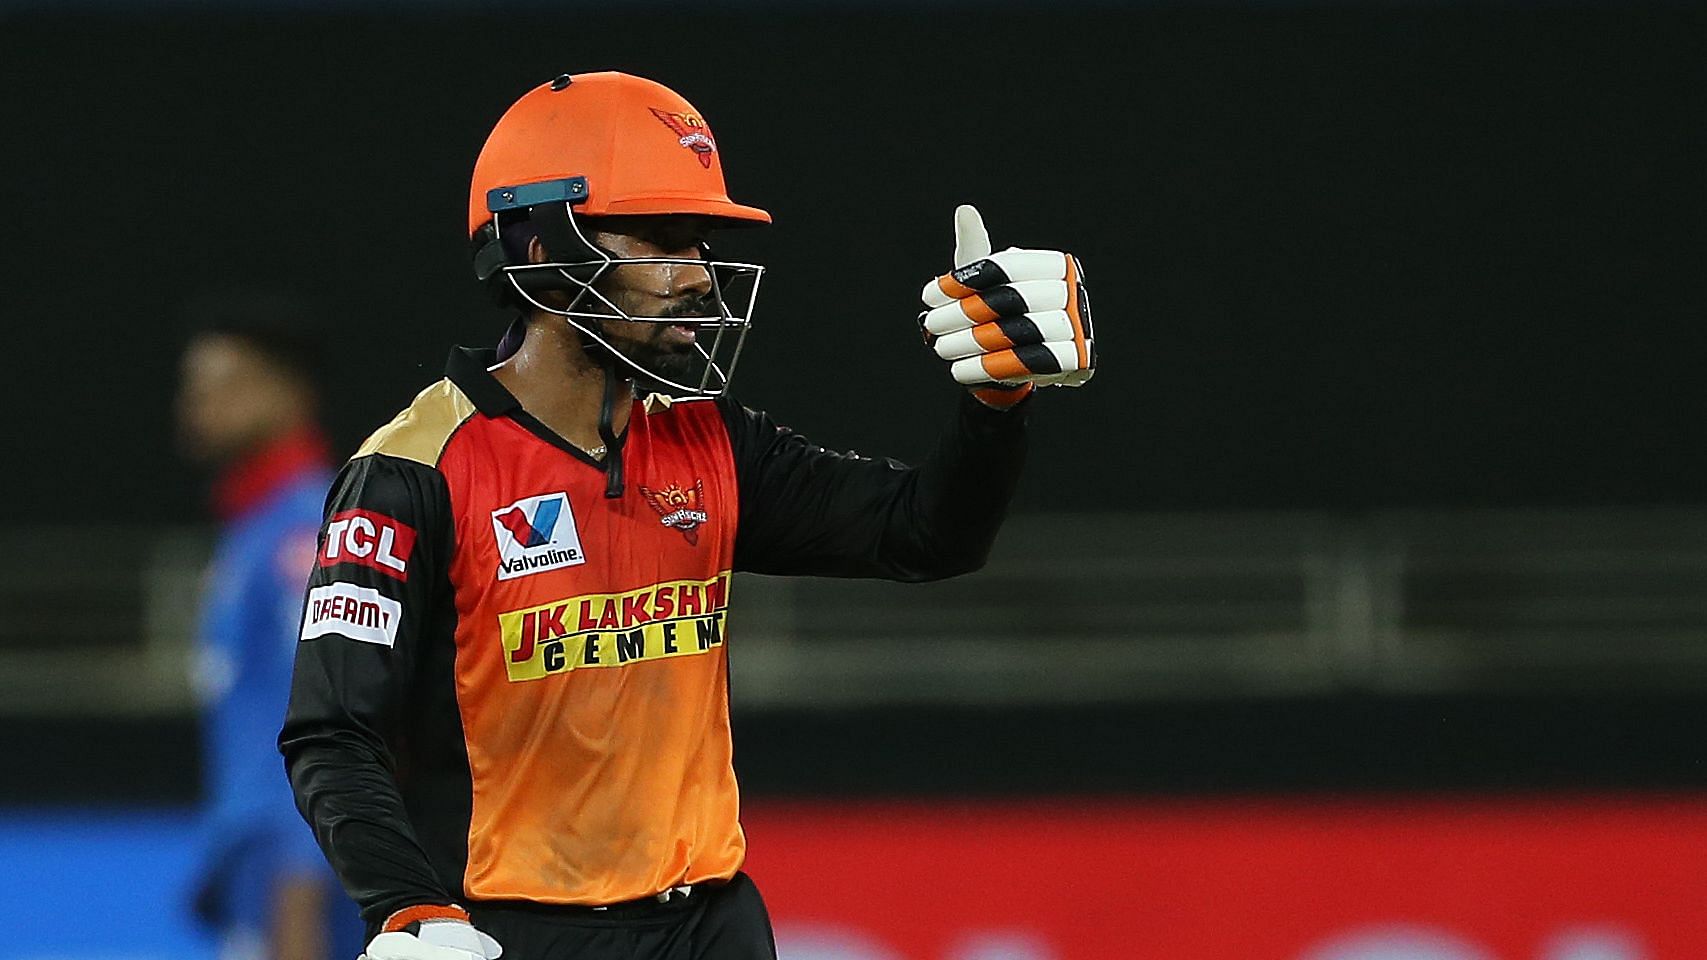 Wriddhiman Saha scored 87 while opening for SRH against DC.